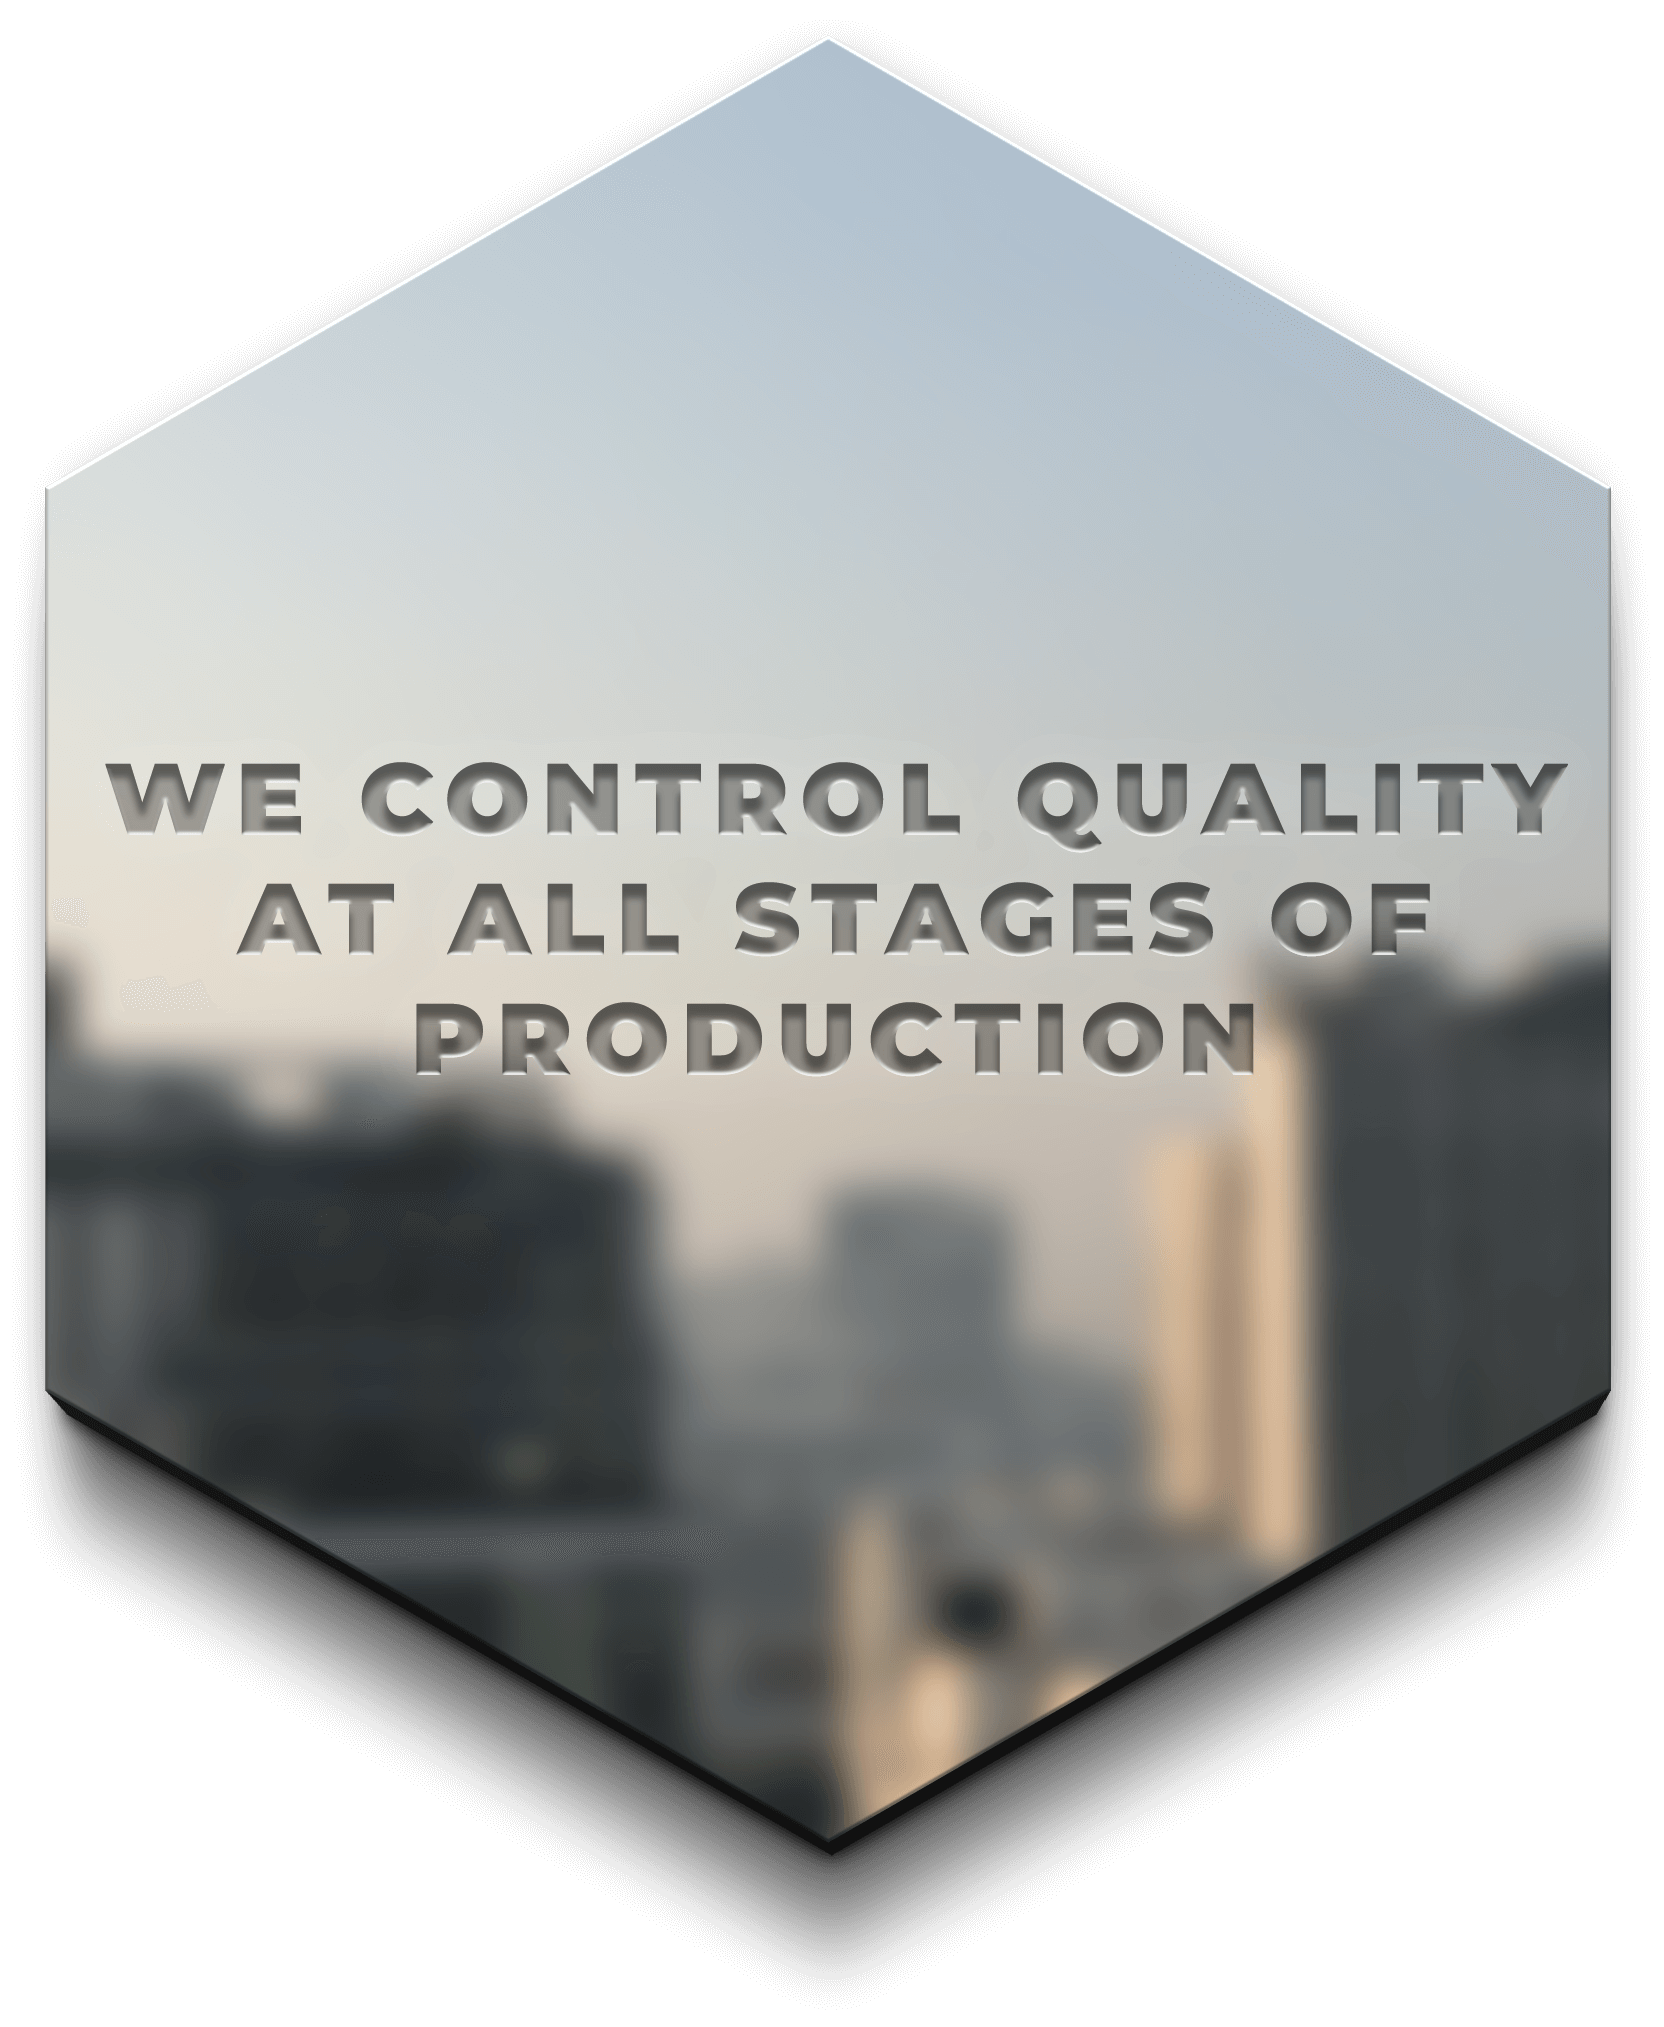 We controll quality at all stages of production